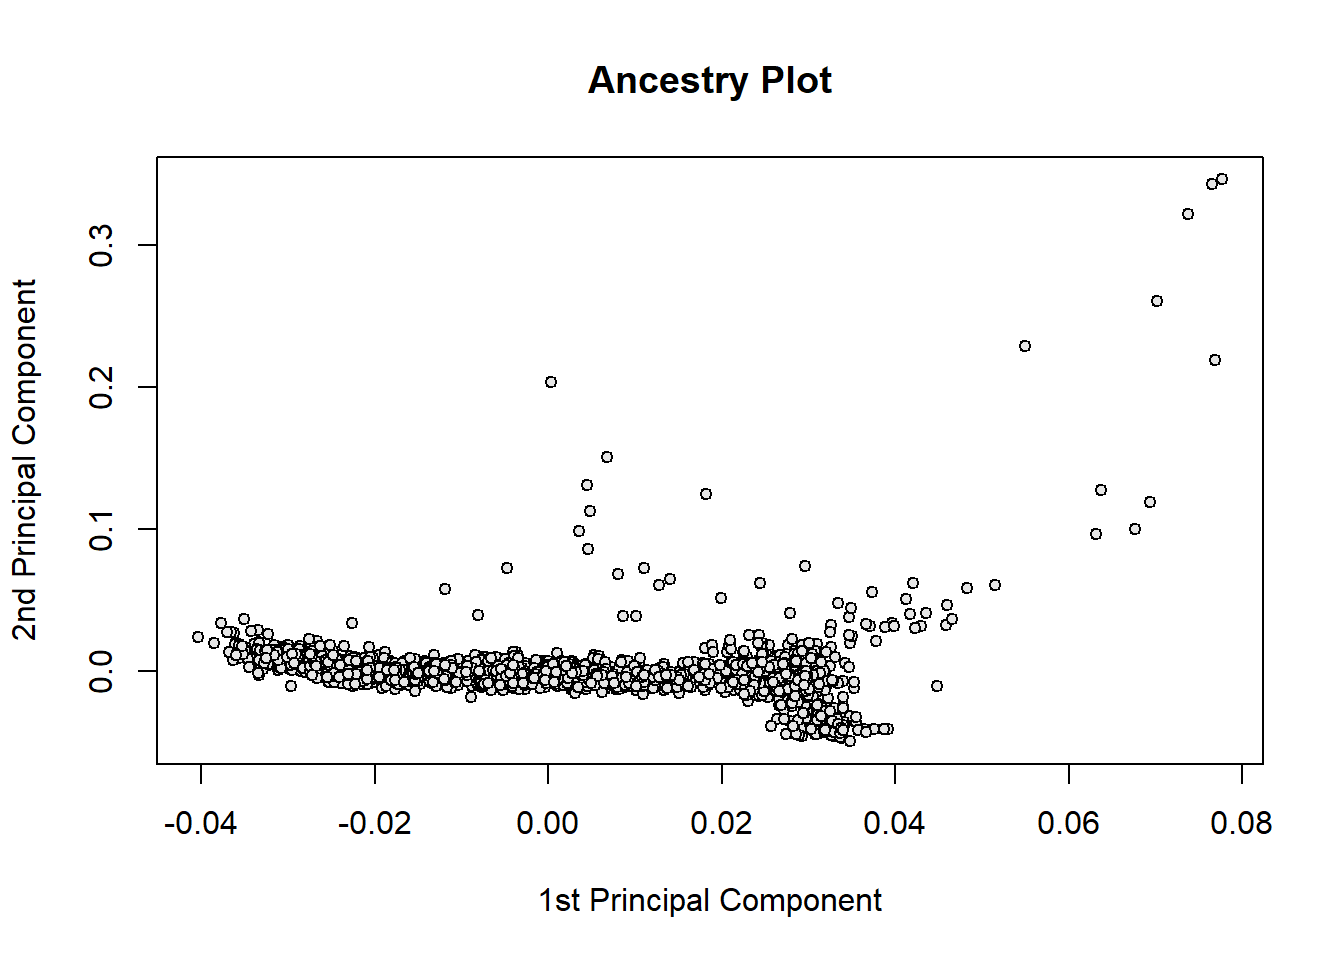 1st and 2nd principal components of obesity GWAS data example.